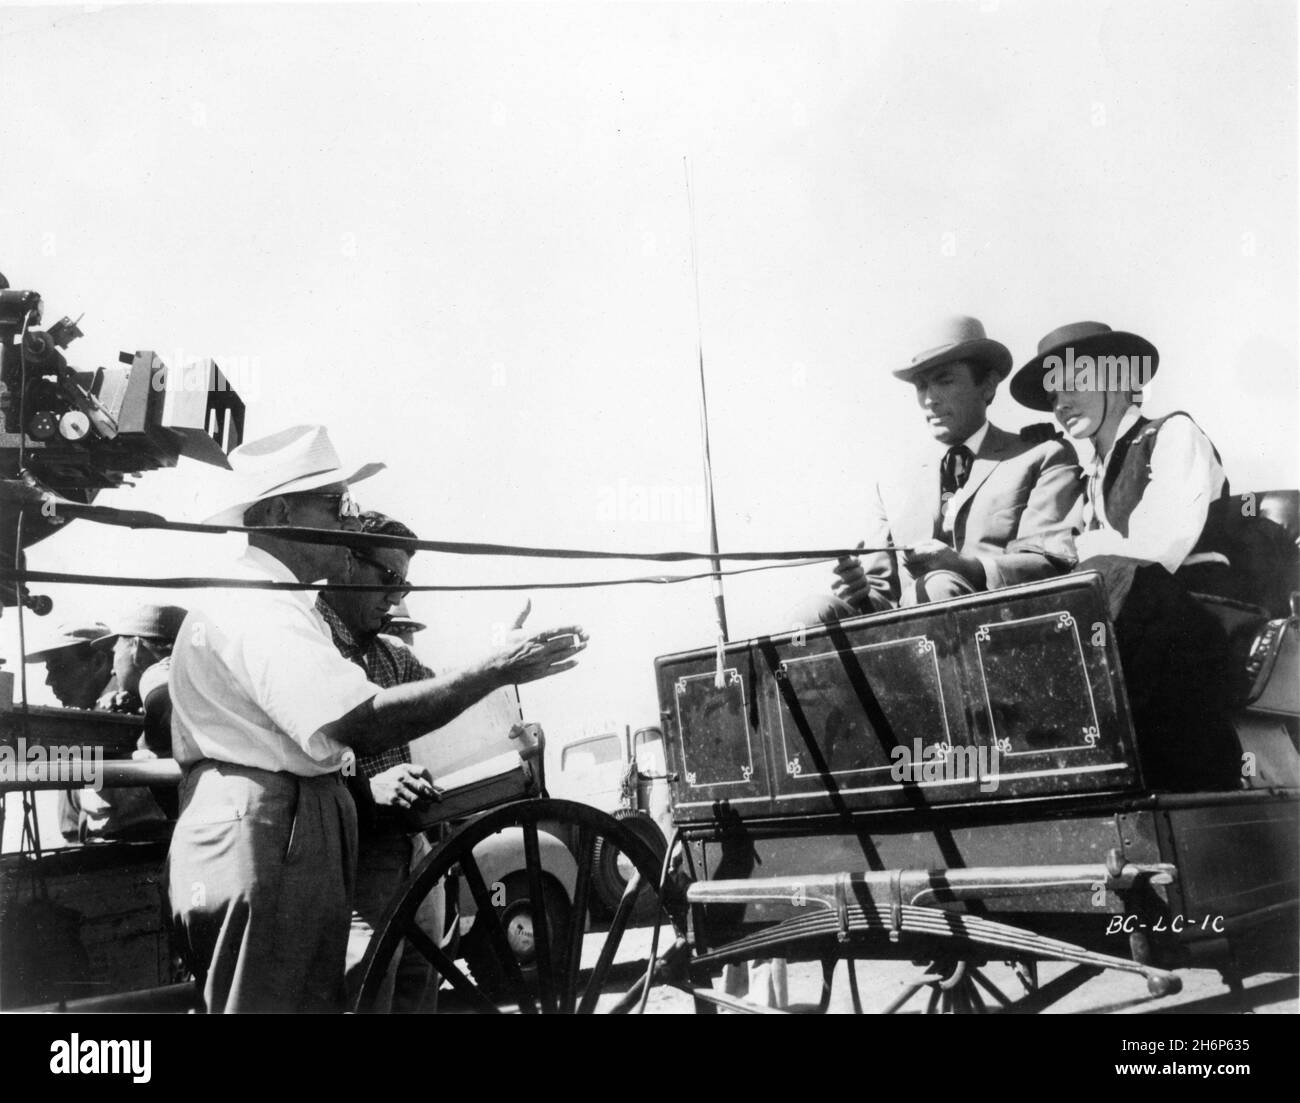 Director WILLIAM WYLER and Camera / Movie Crew on set location candid filming GREGORY PECK and CARROLL BAKER in THE BIG COUNTRY 1958 director WILLIAM WYLER novel Donald Hamilton music Jerome Moross producers Gregory Peck and William Wyler Anthony - Worldwide Productions / United Artists Stock Photo